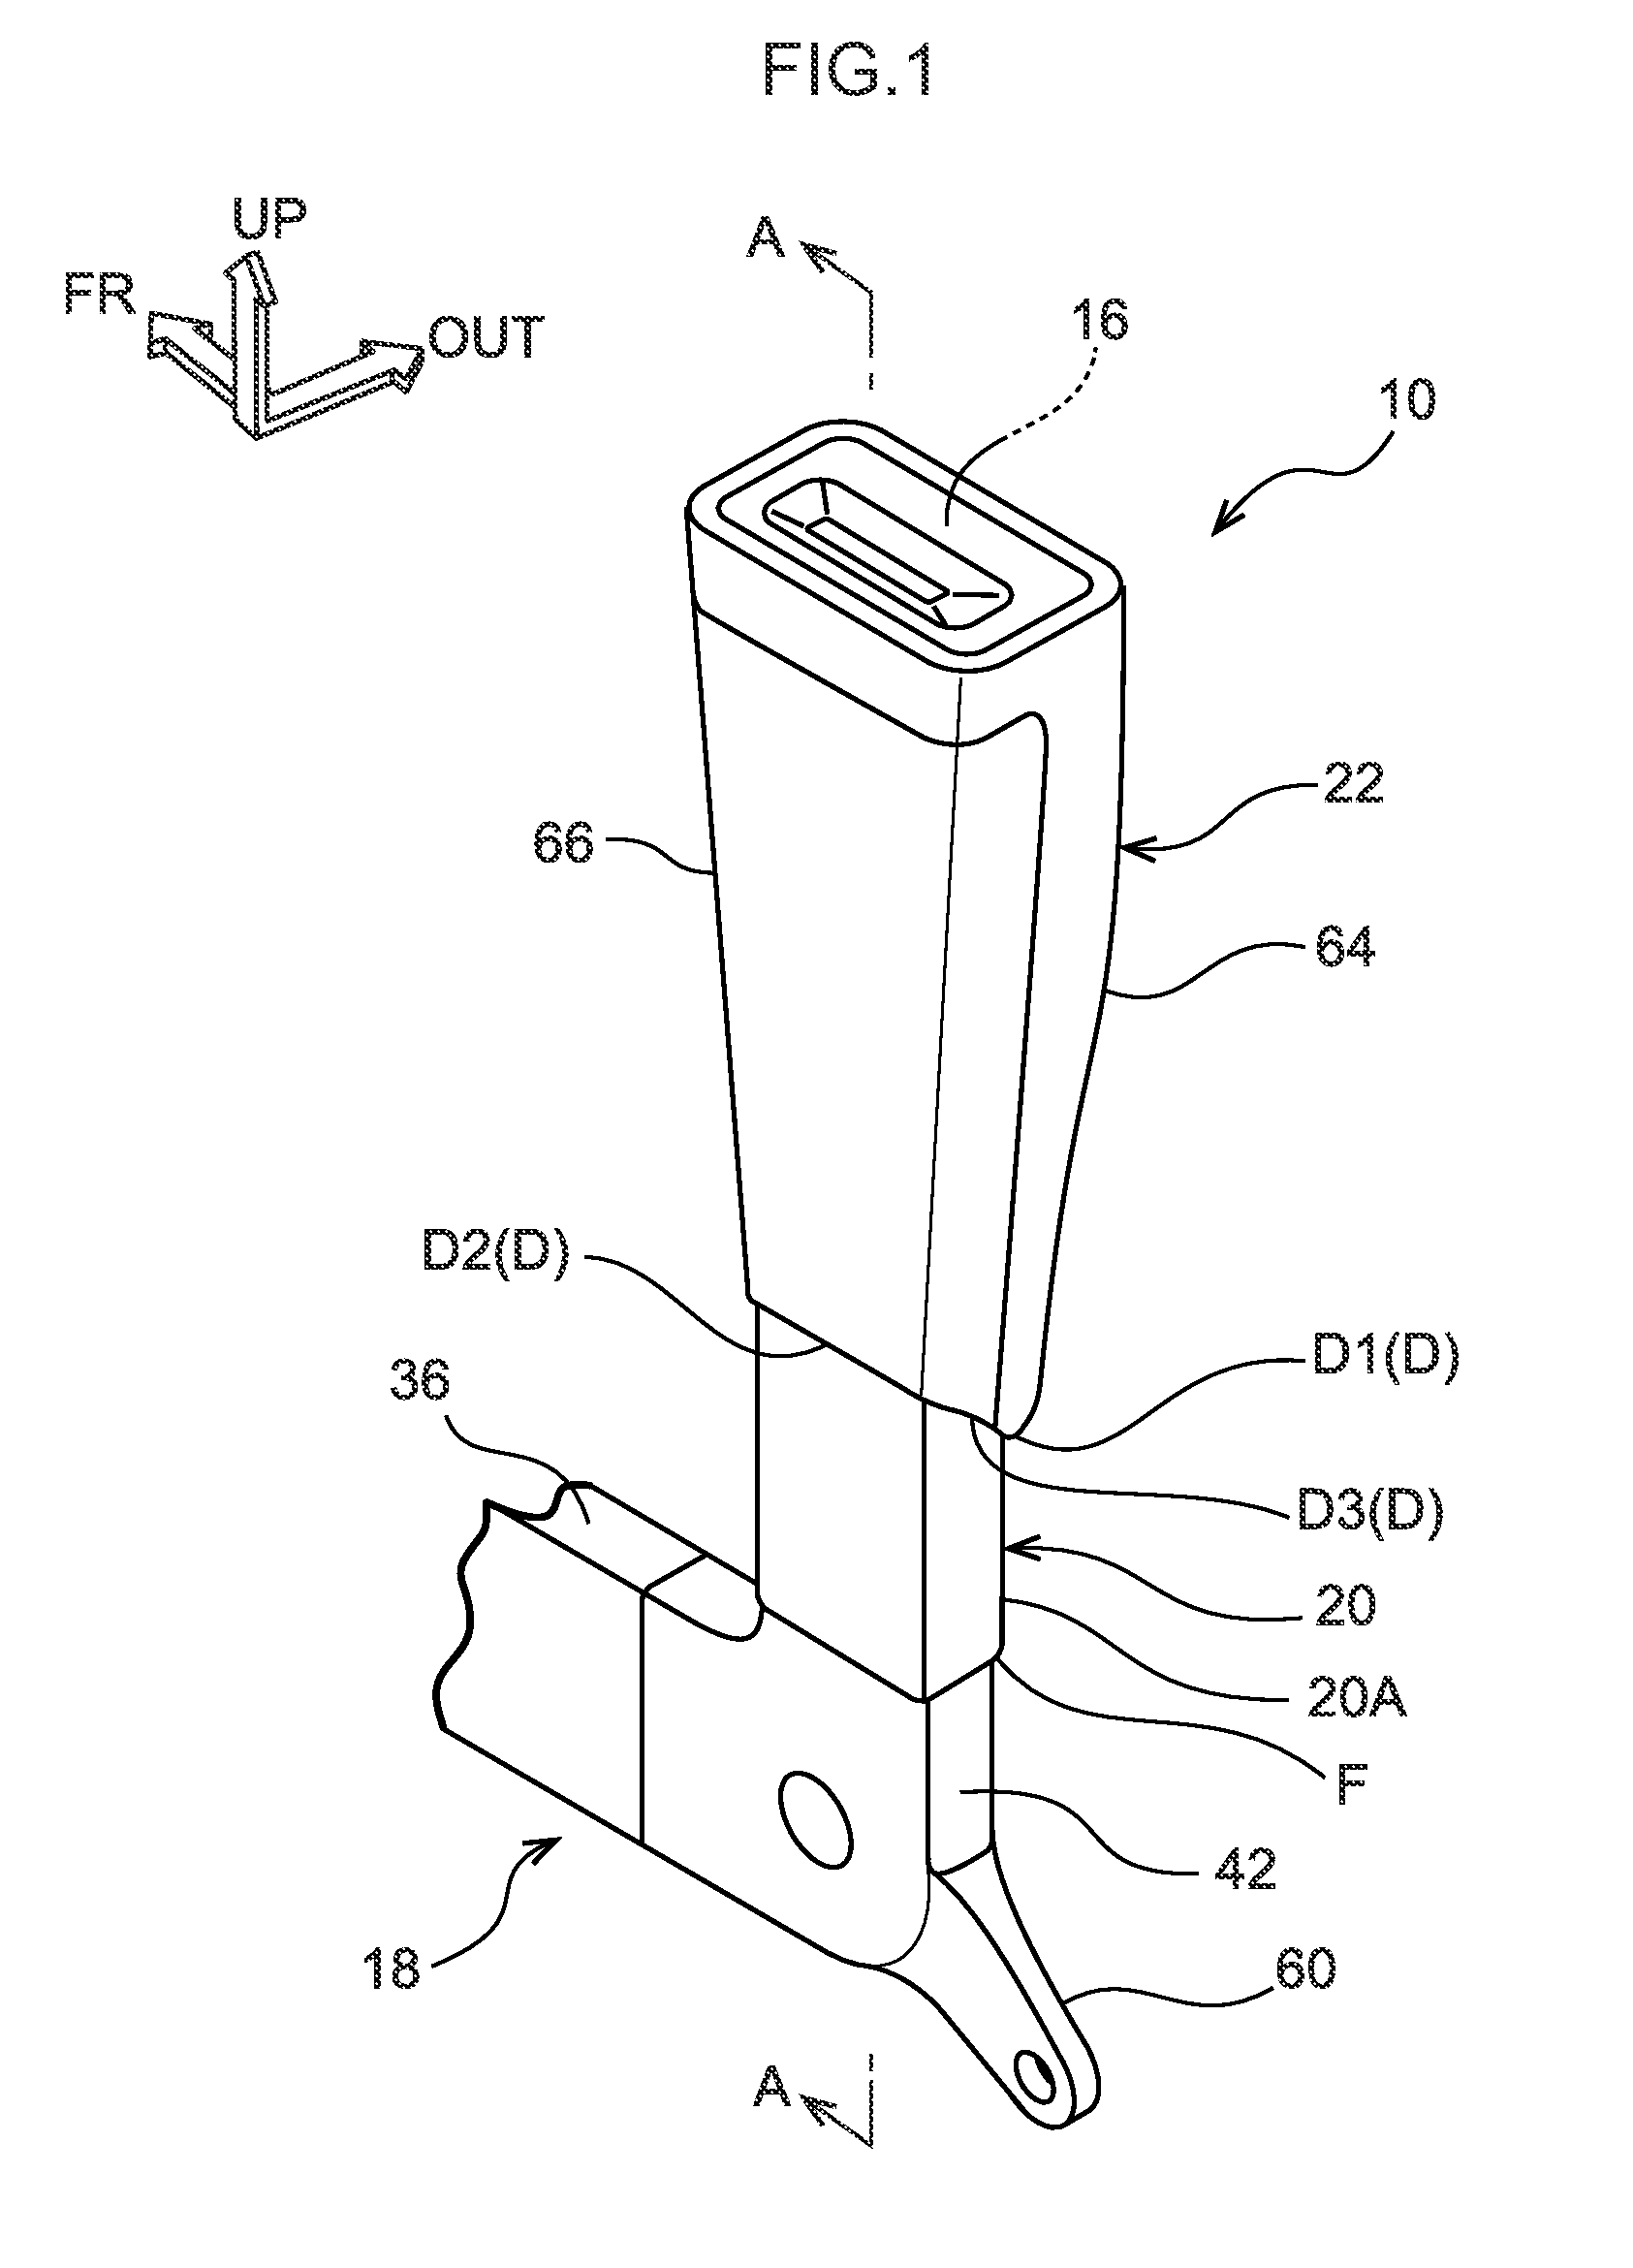 Lift-up buckle device